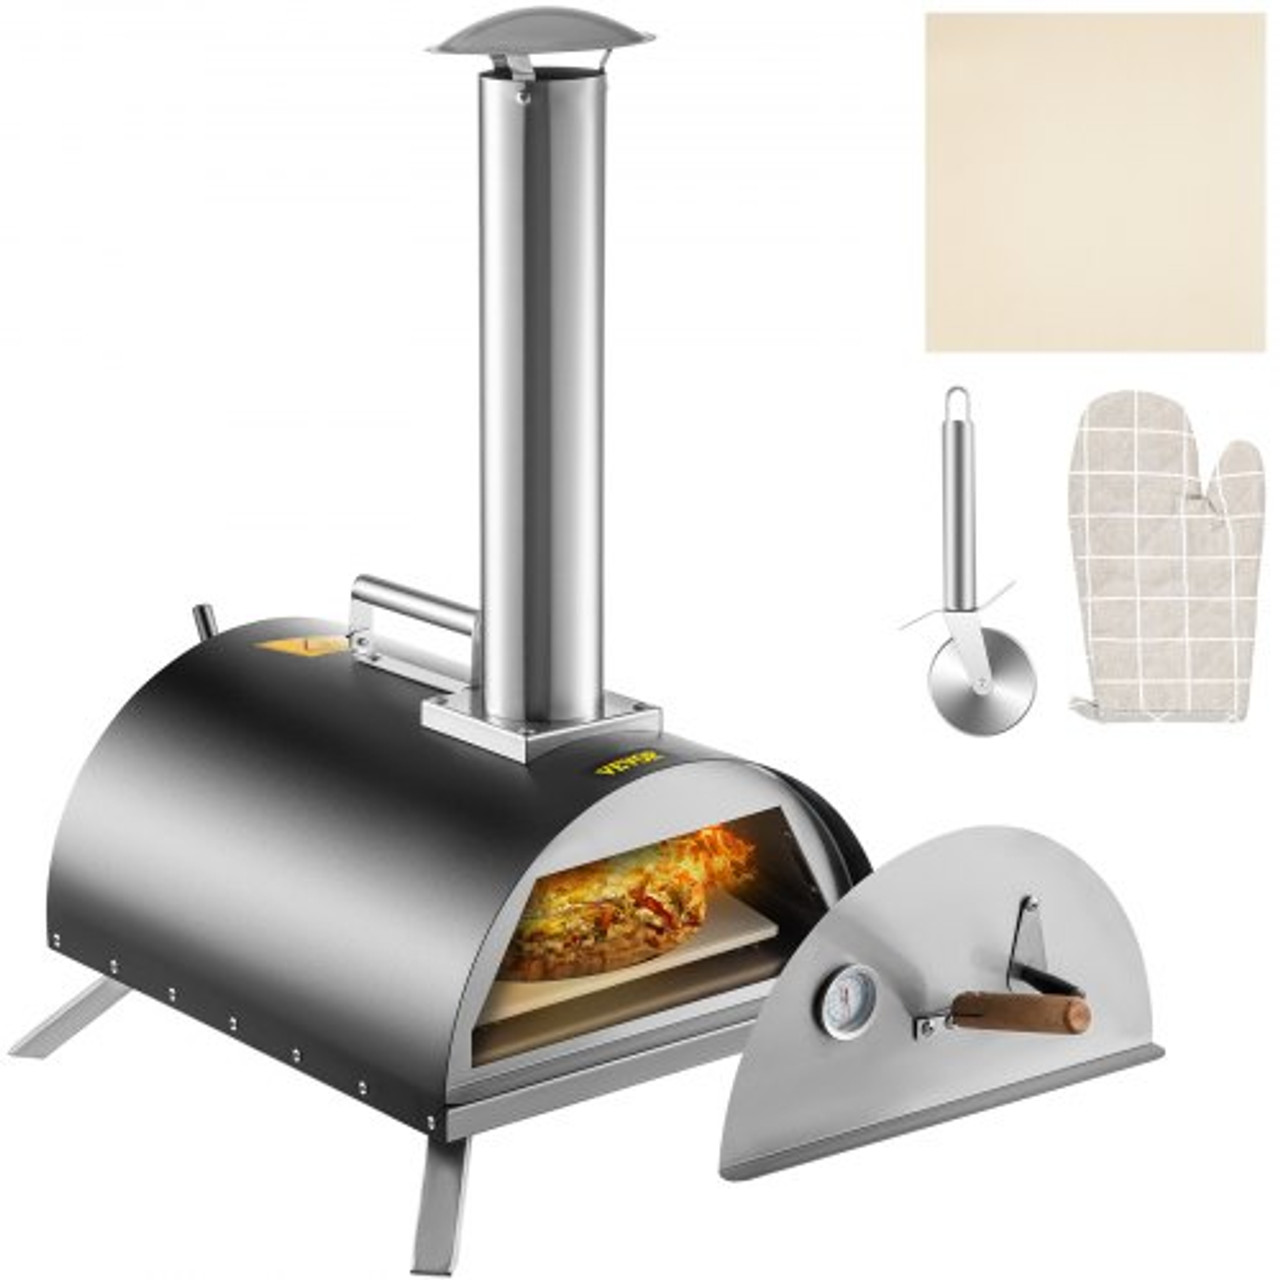 Outdoor Pizza Oven 12",Wood Fired Oven with Feeding Port,Wood Pellet Burning Pizza Maker Ovens 932?Max Temperature Stainless Steel Portable Pizza Ovens with Accessories for Outdoor Cooking.